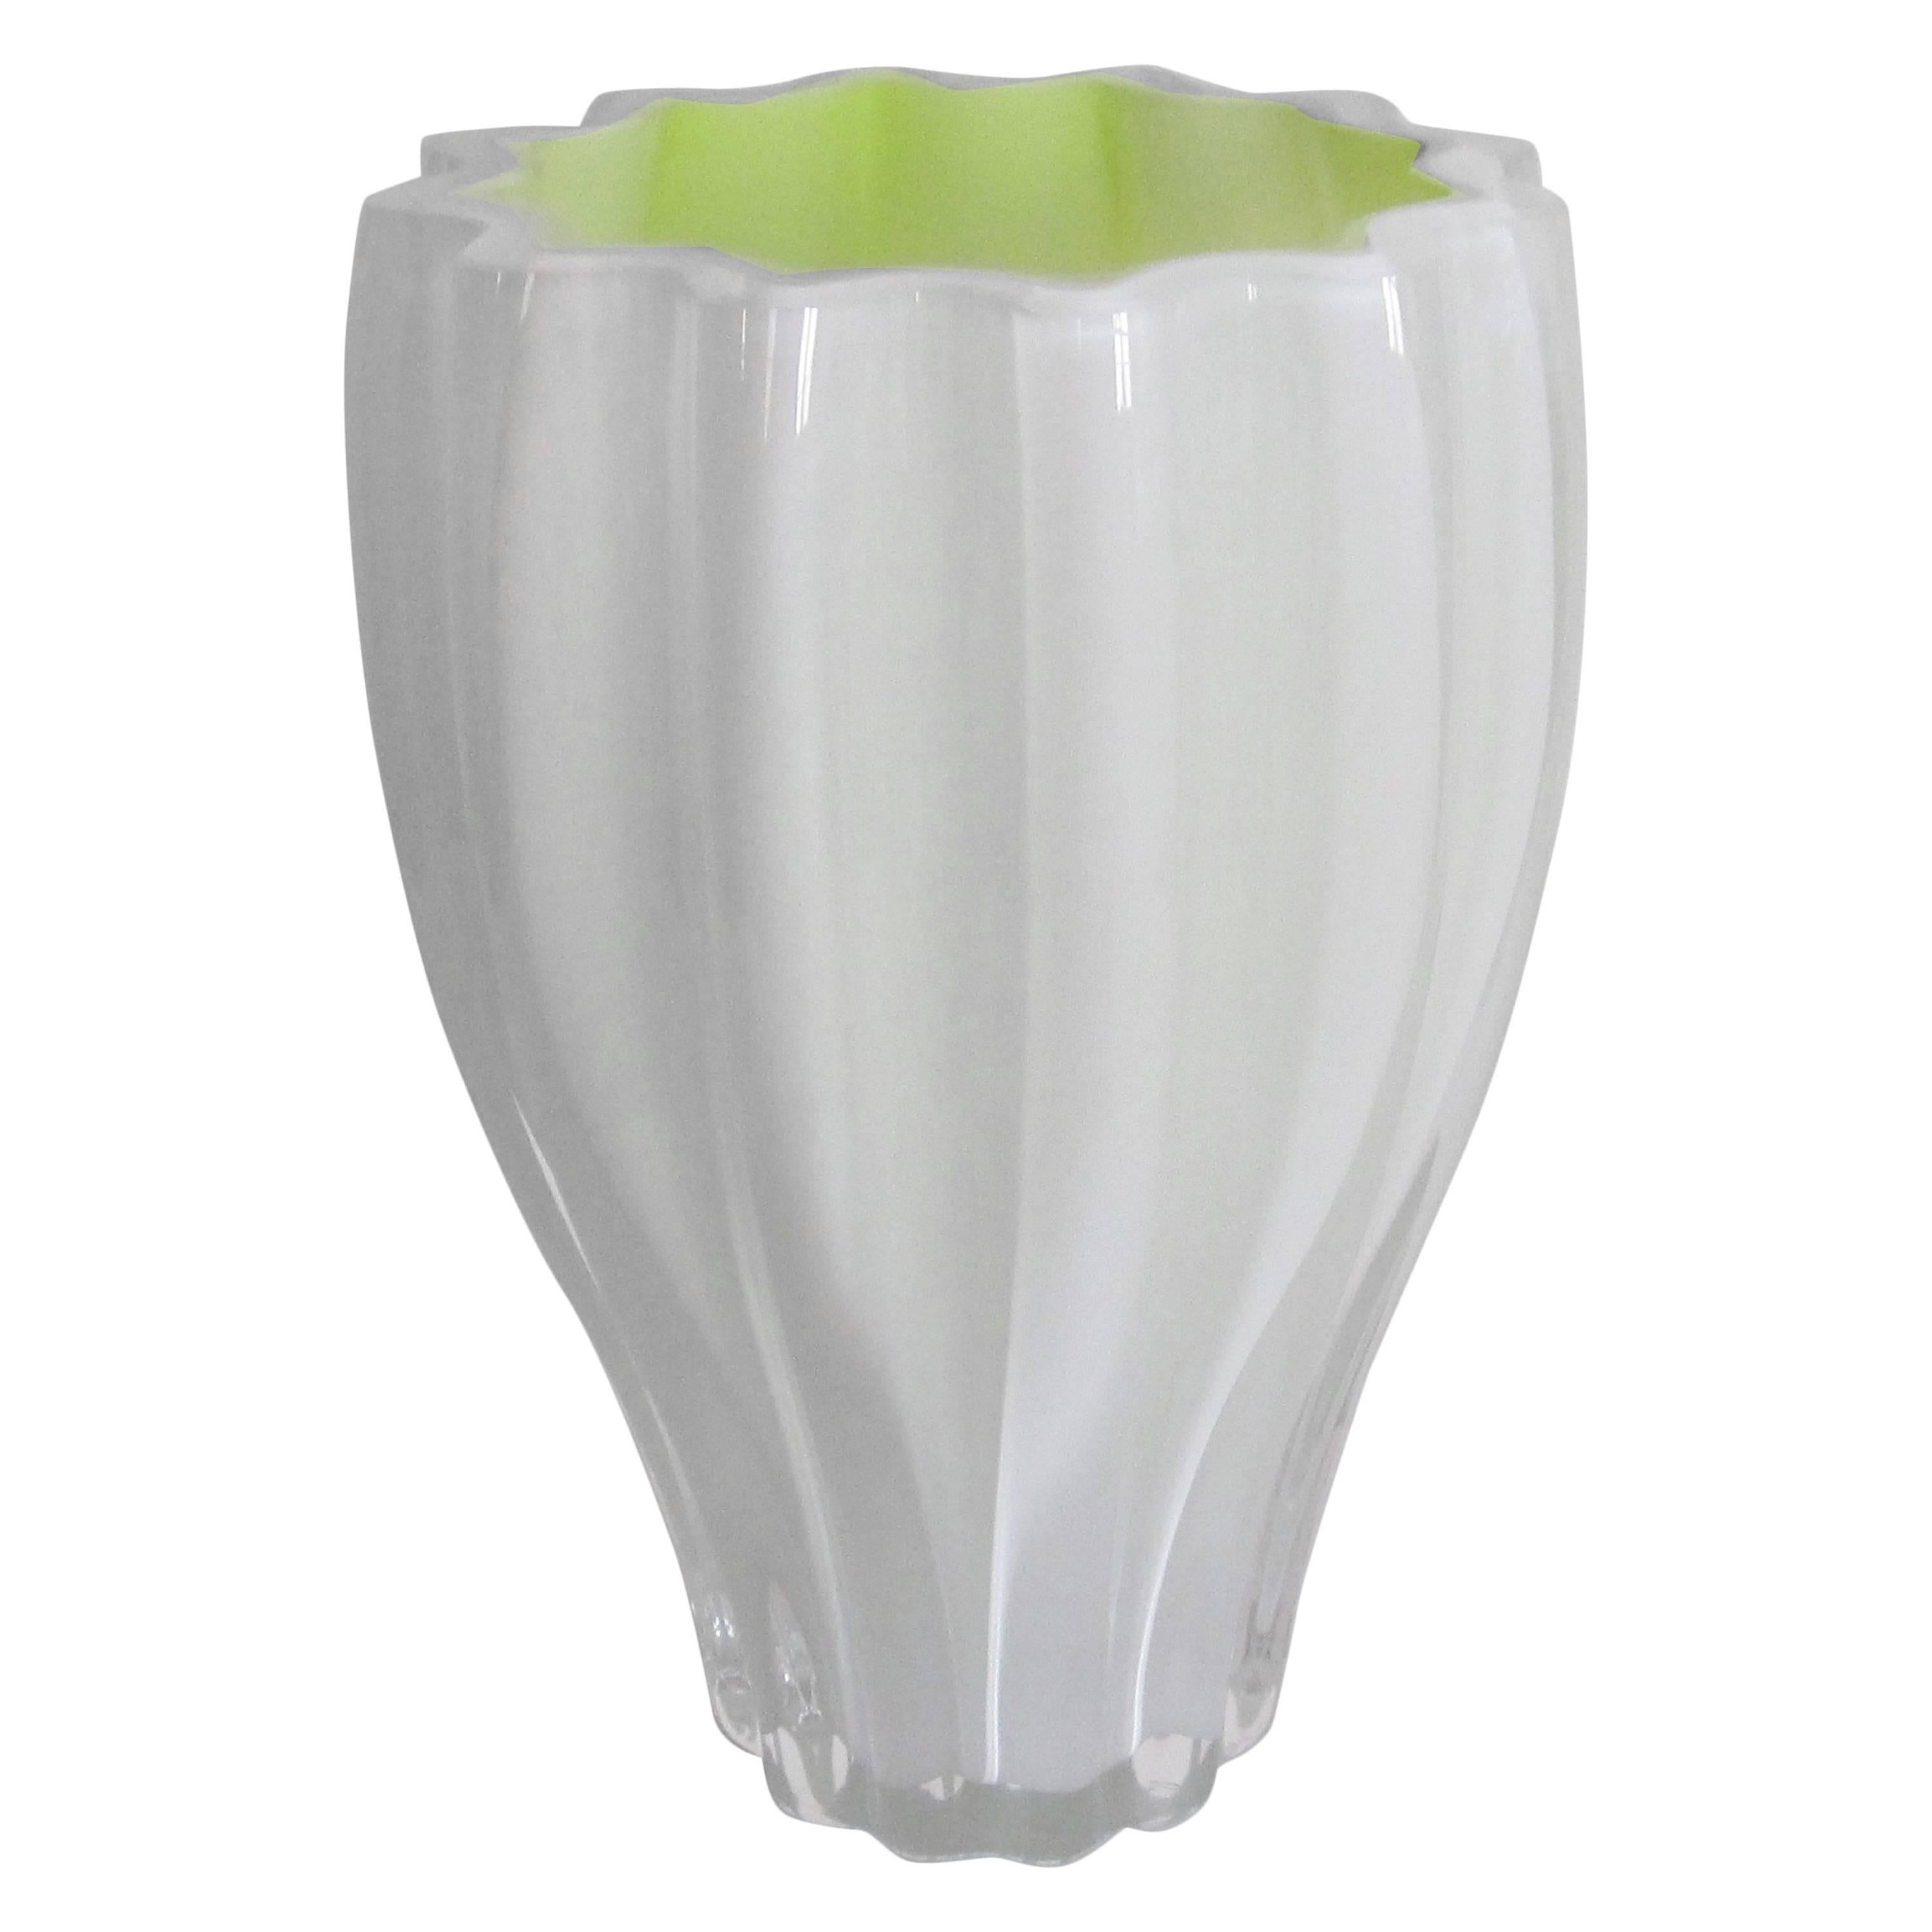 Postmodern White and Neon Yellow Art Glass Vase from Sweden For Sale